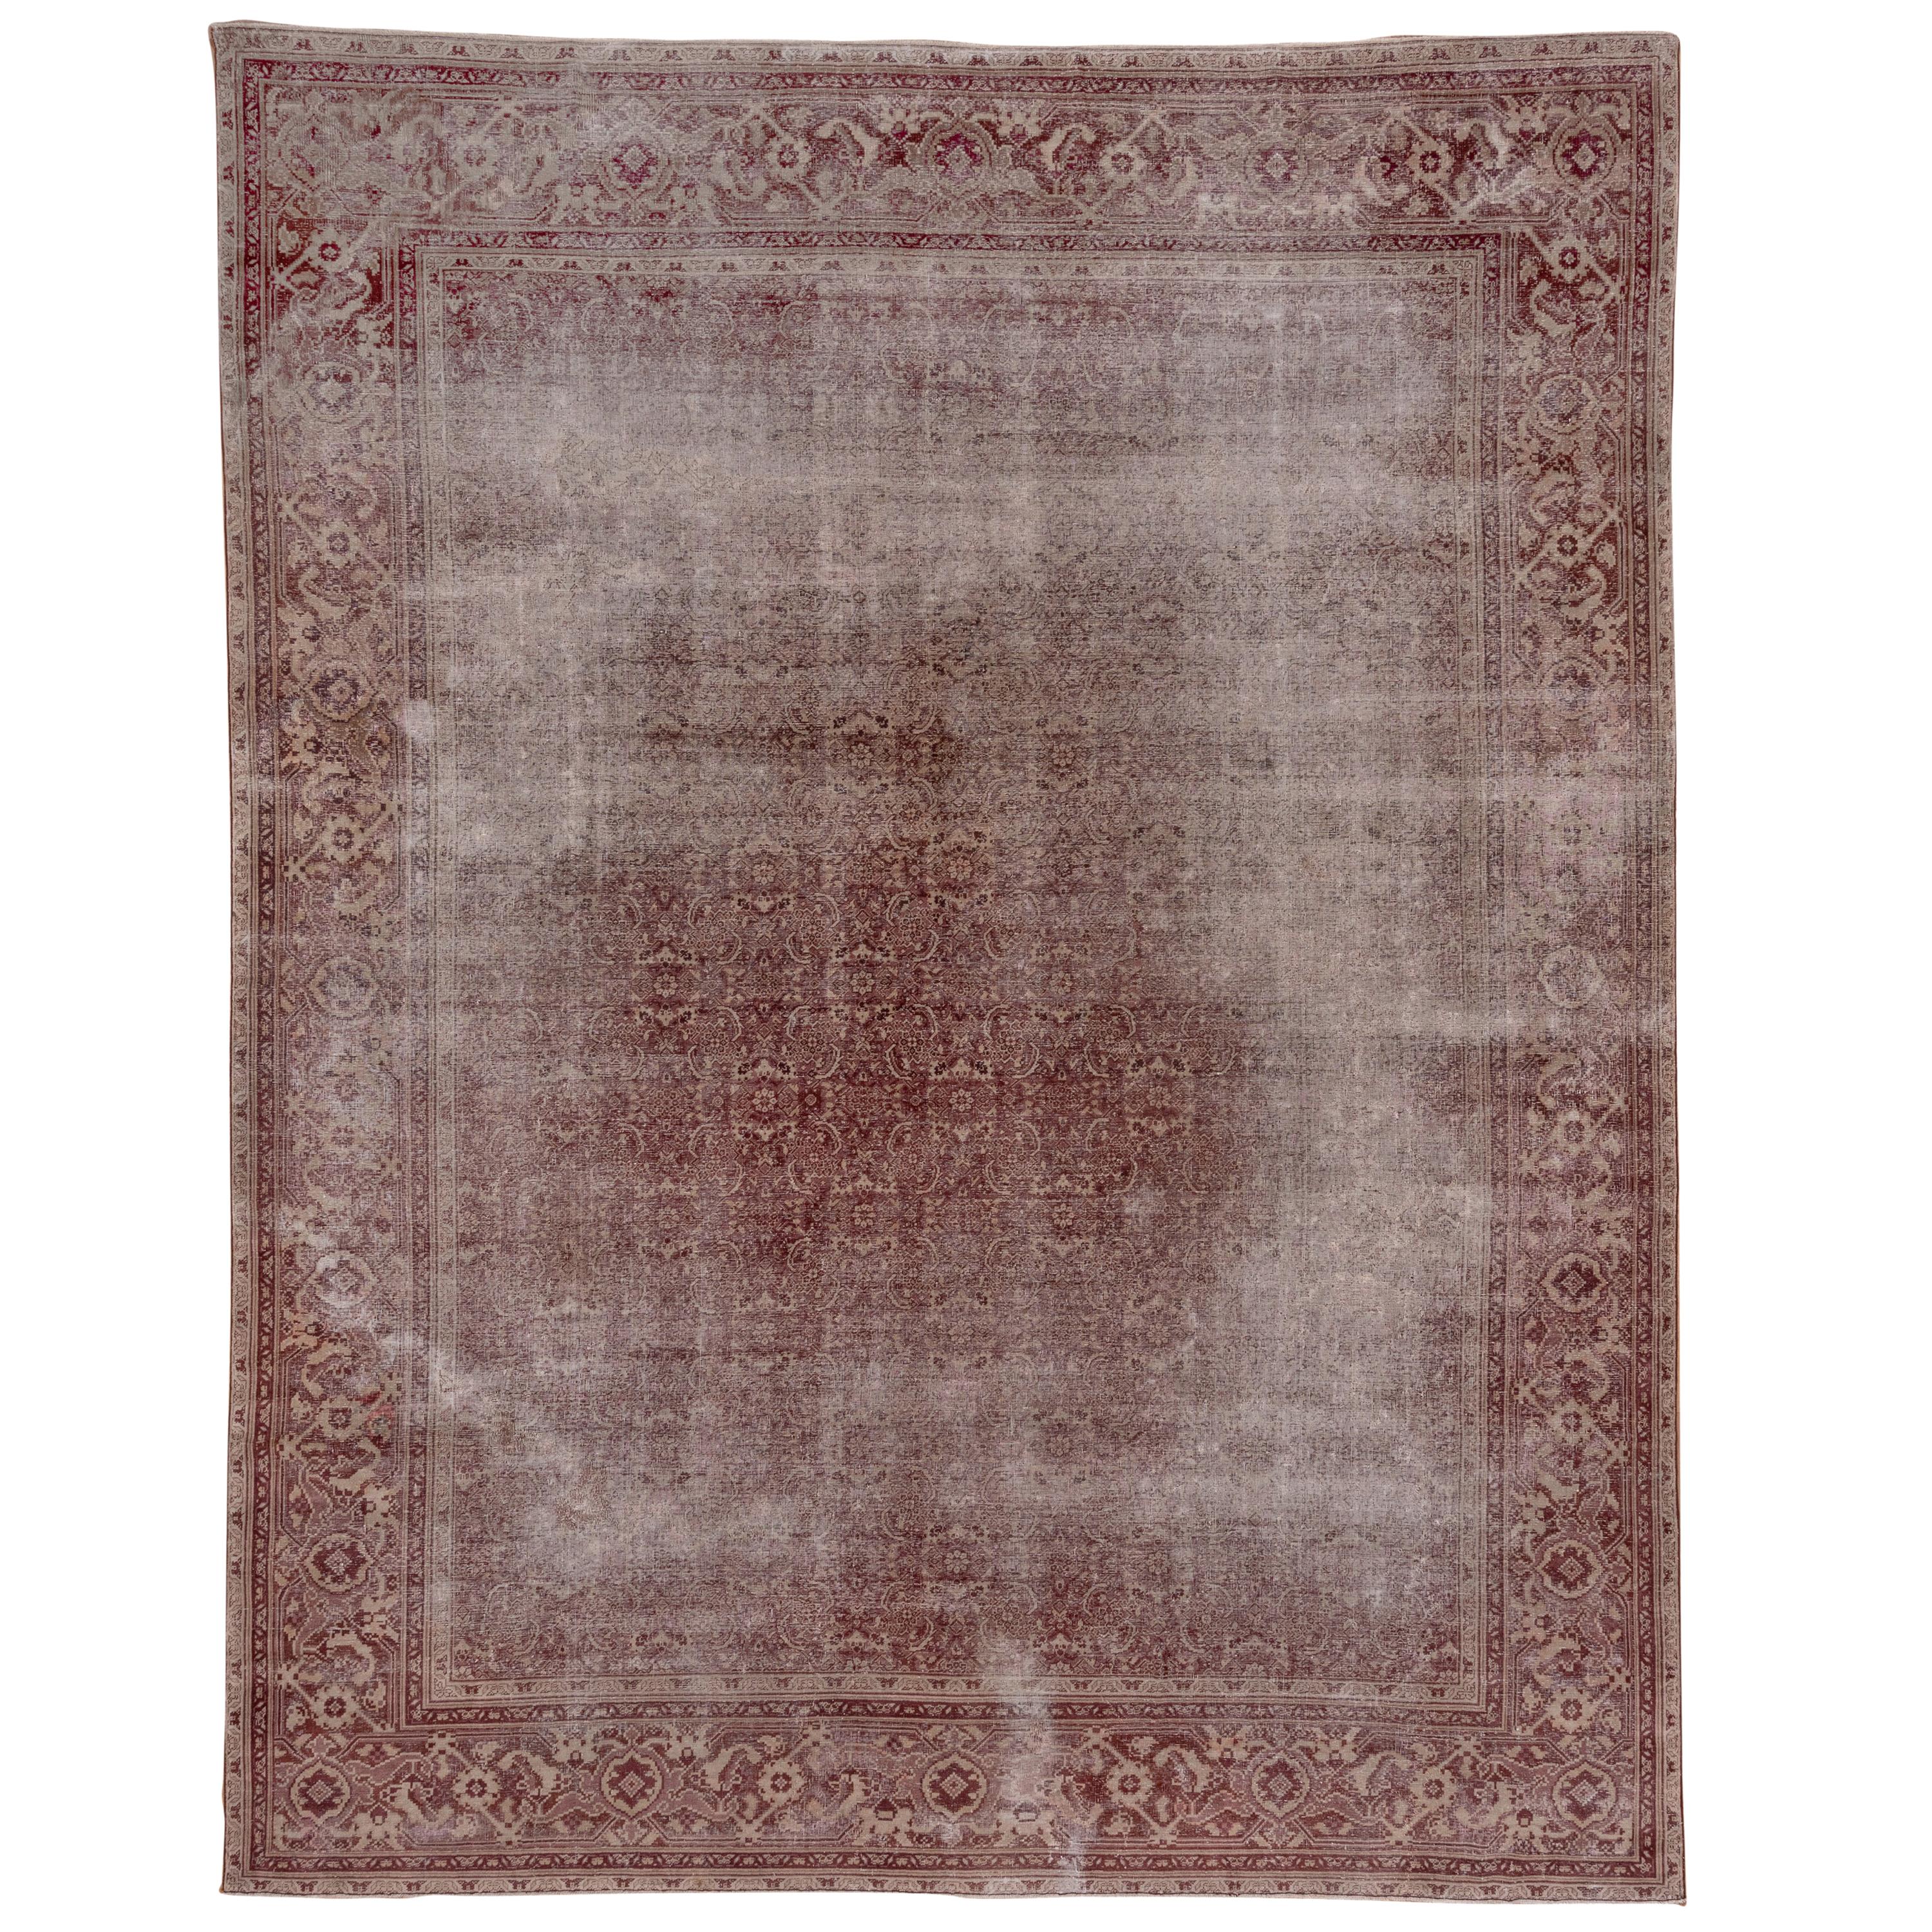 Distressed Antique Indian Amritzar Rug, Burgundy and Brown Tones For Sale